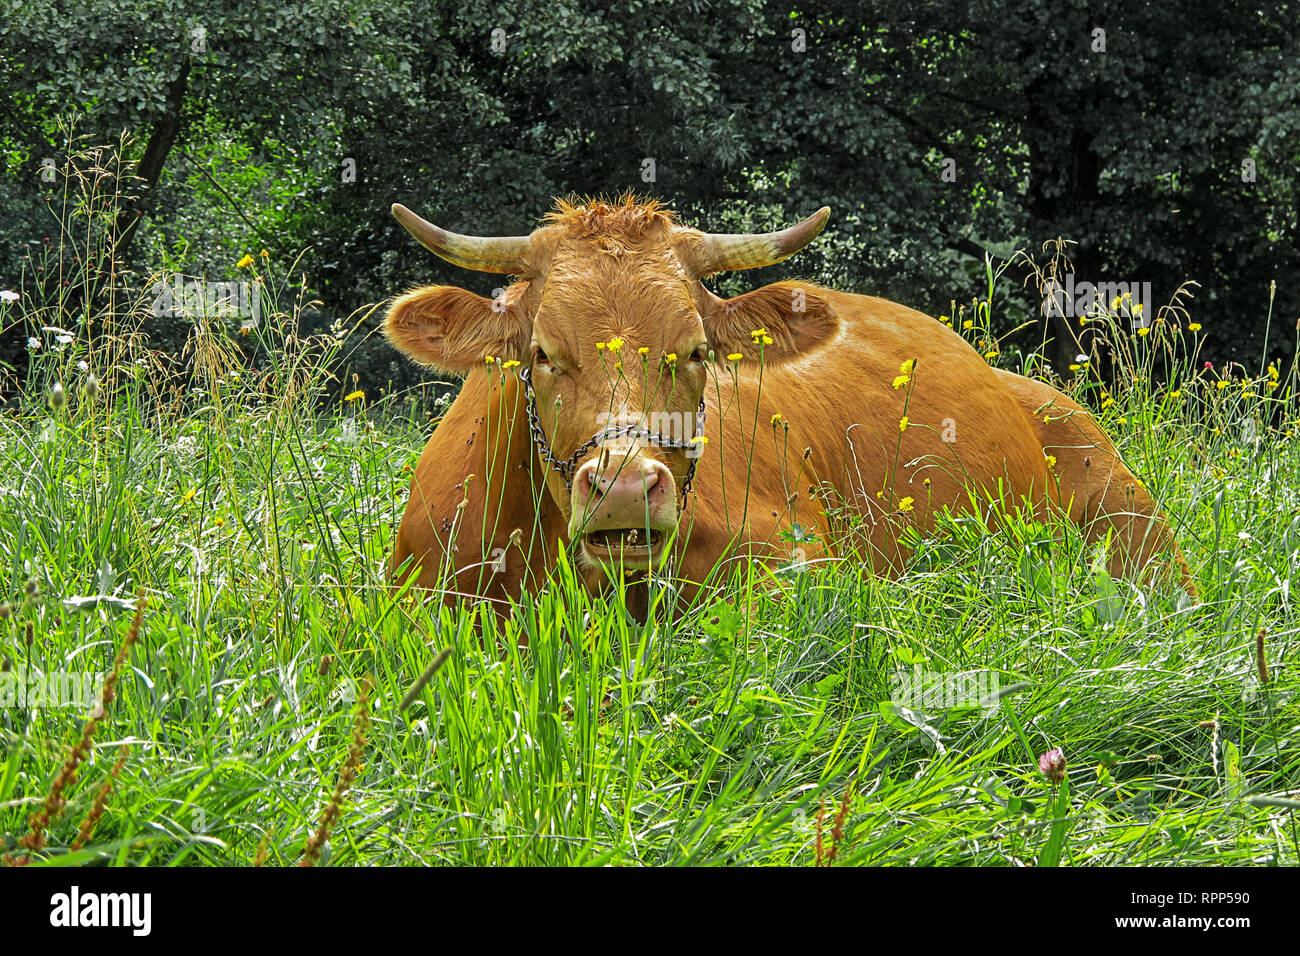 Cow enjoys summer day lying in the grass Stock Photo